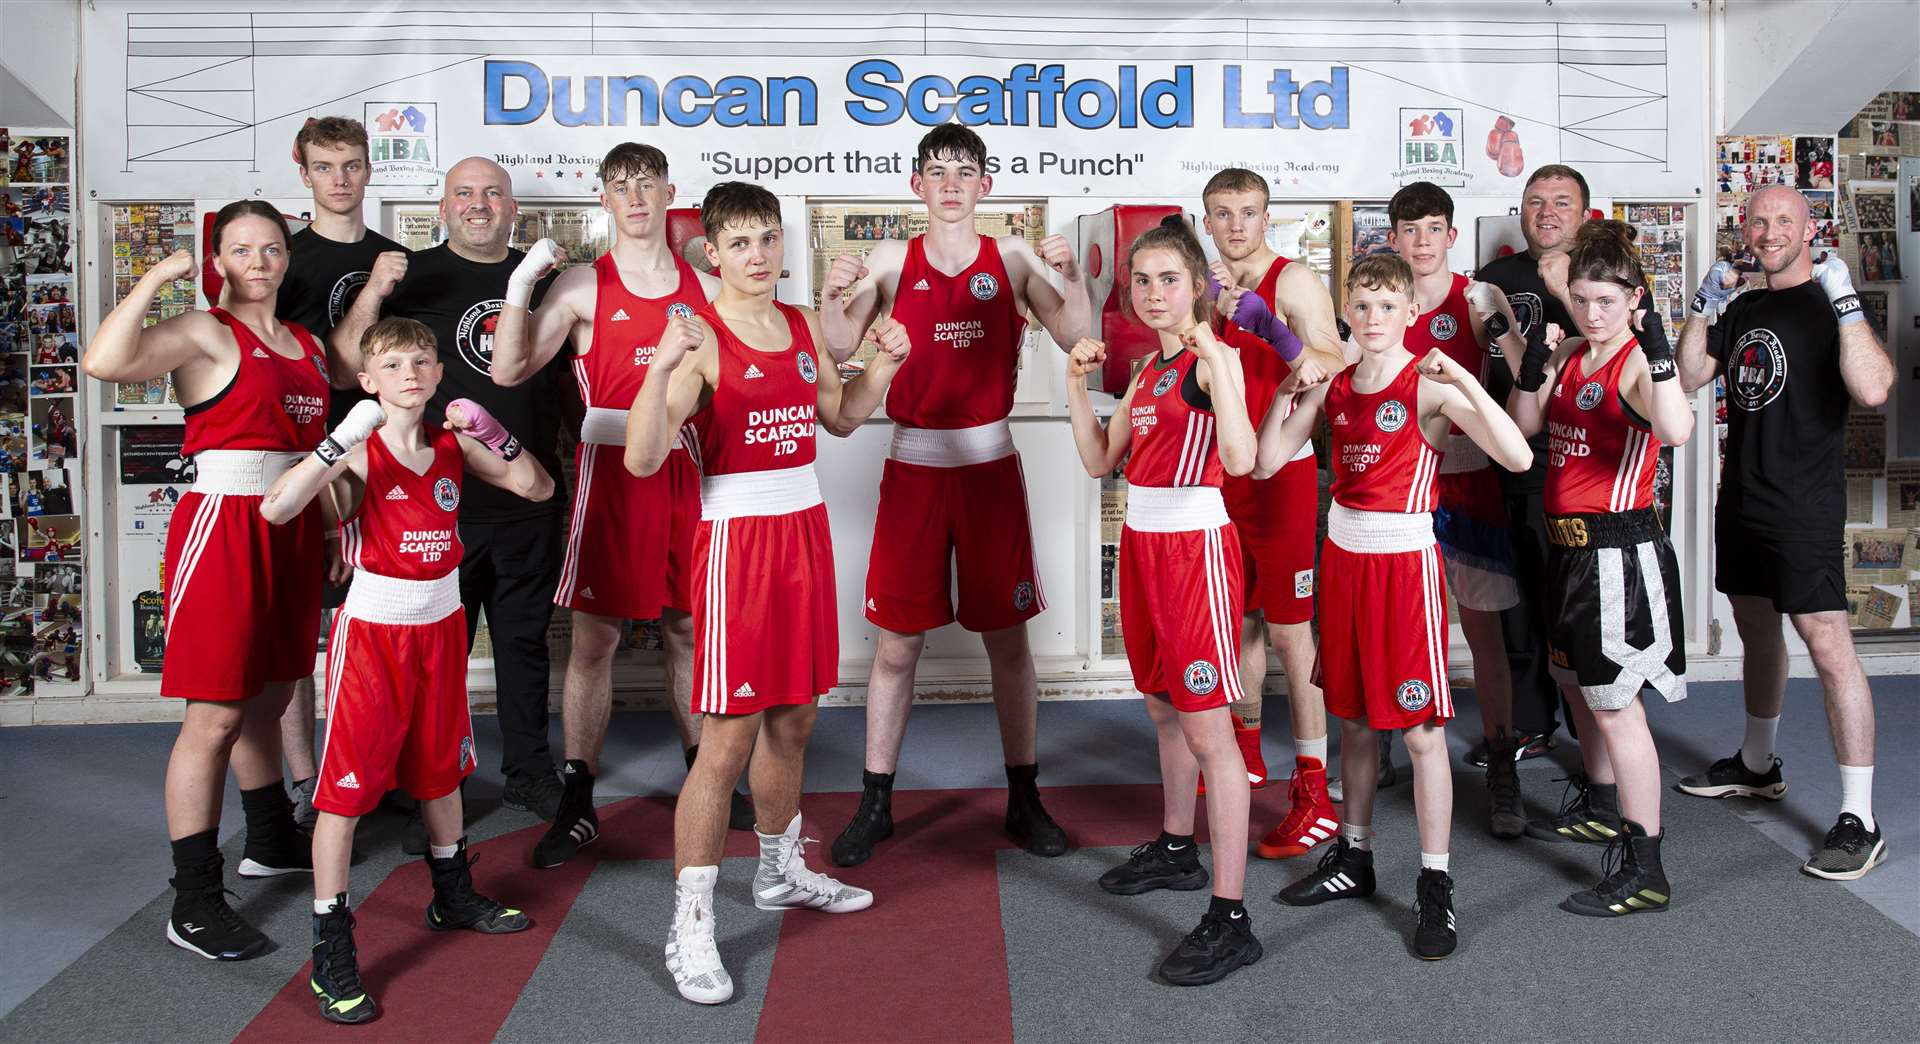 Ten athletes from Highland Boxing Academy were scheduled to compete.